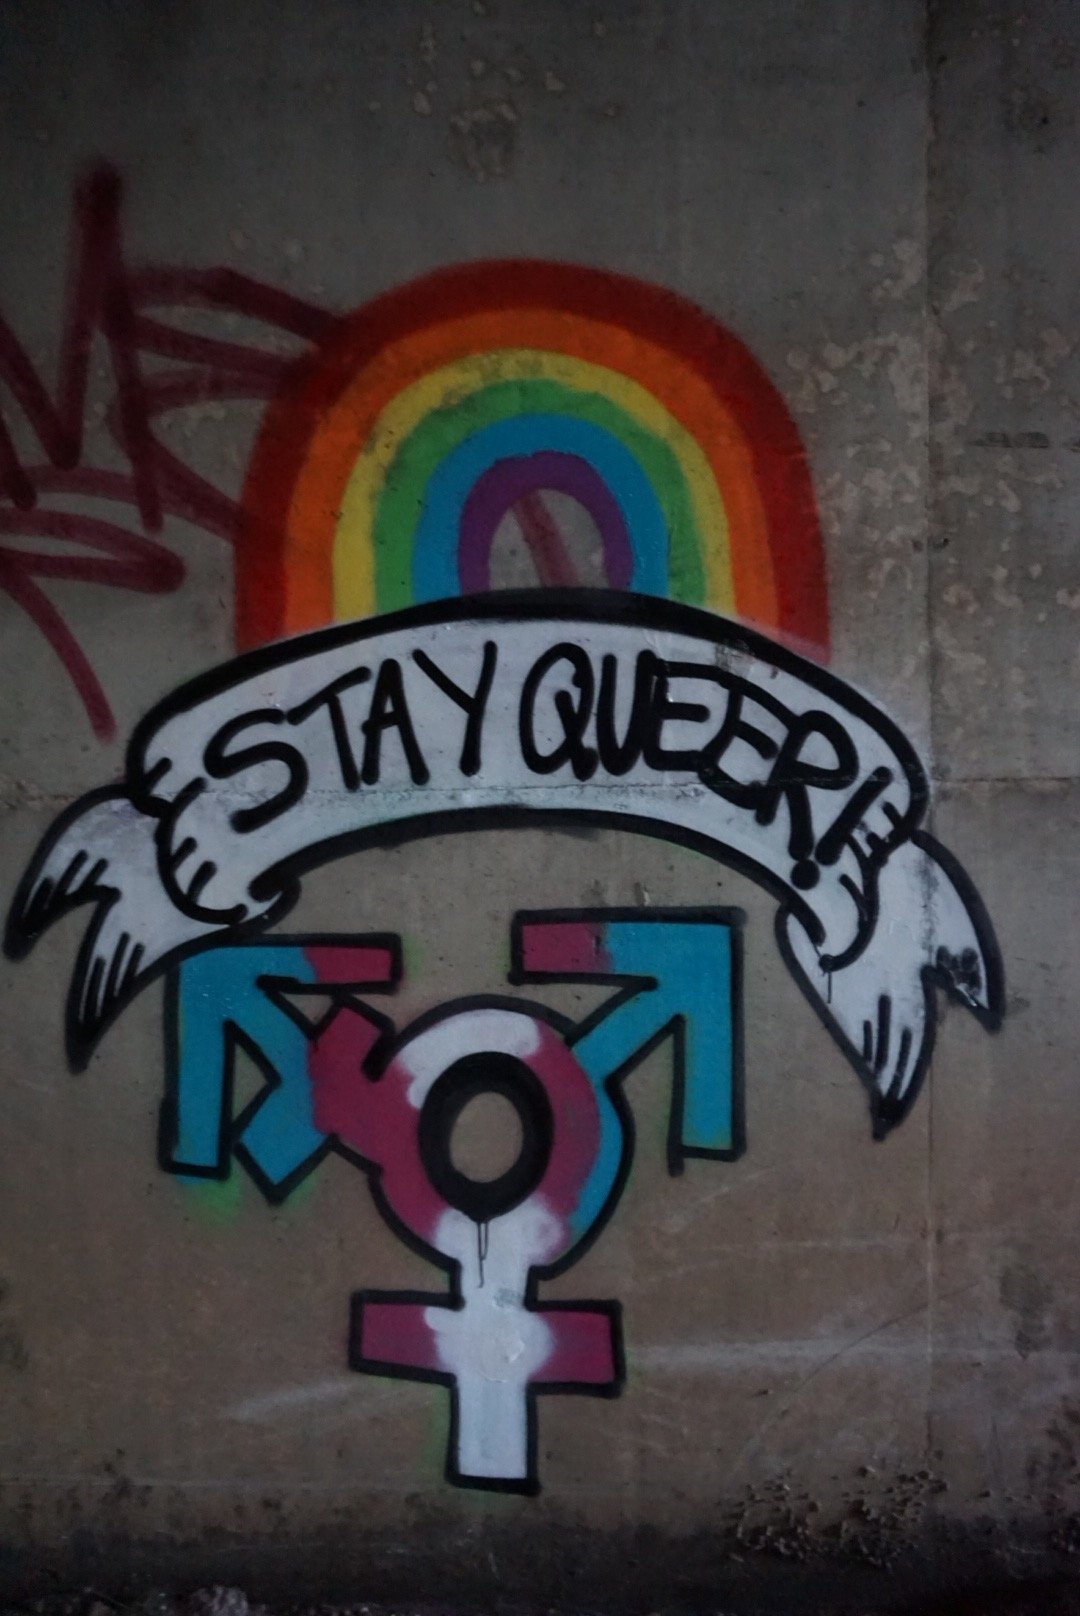 The Masked Muskequeers - UK based queer graffiti crew.